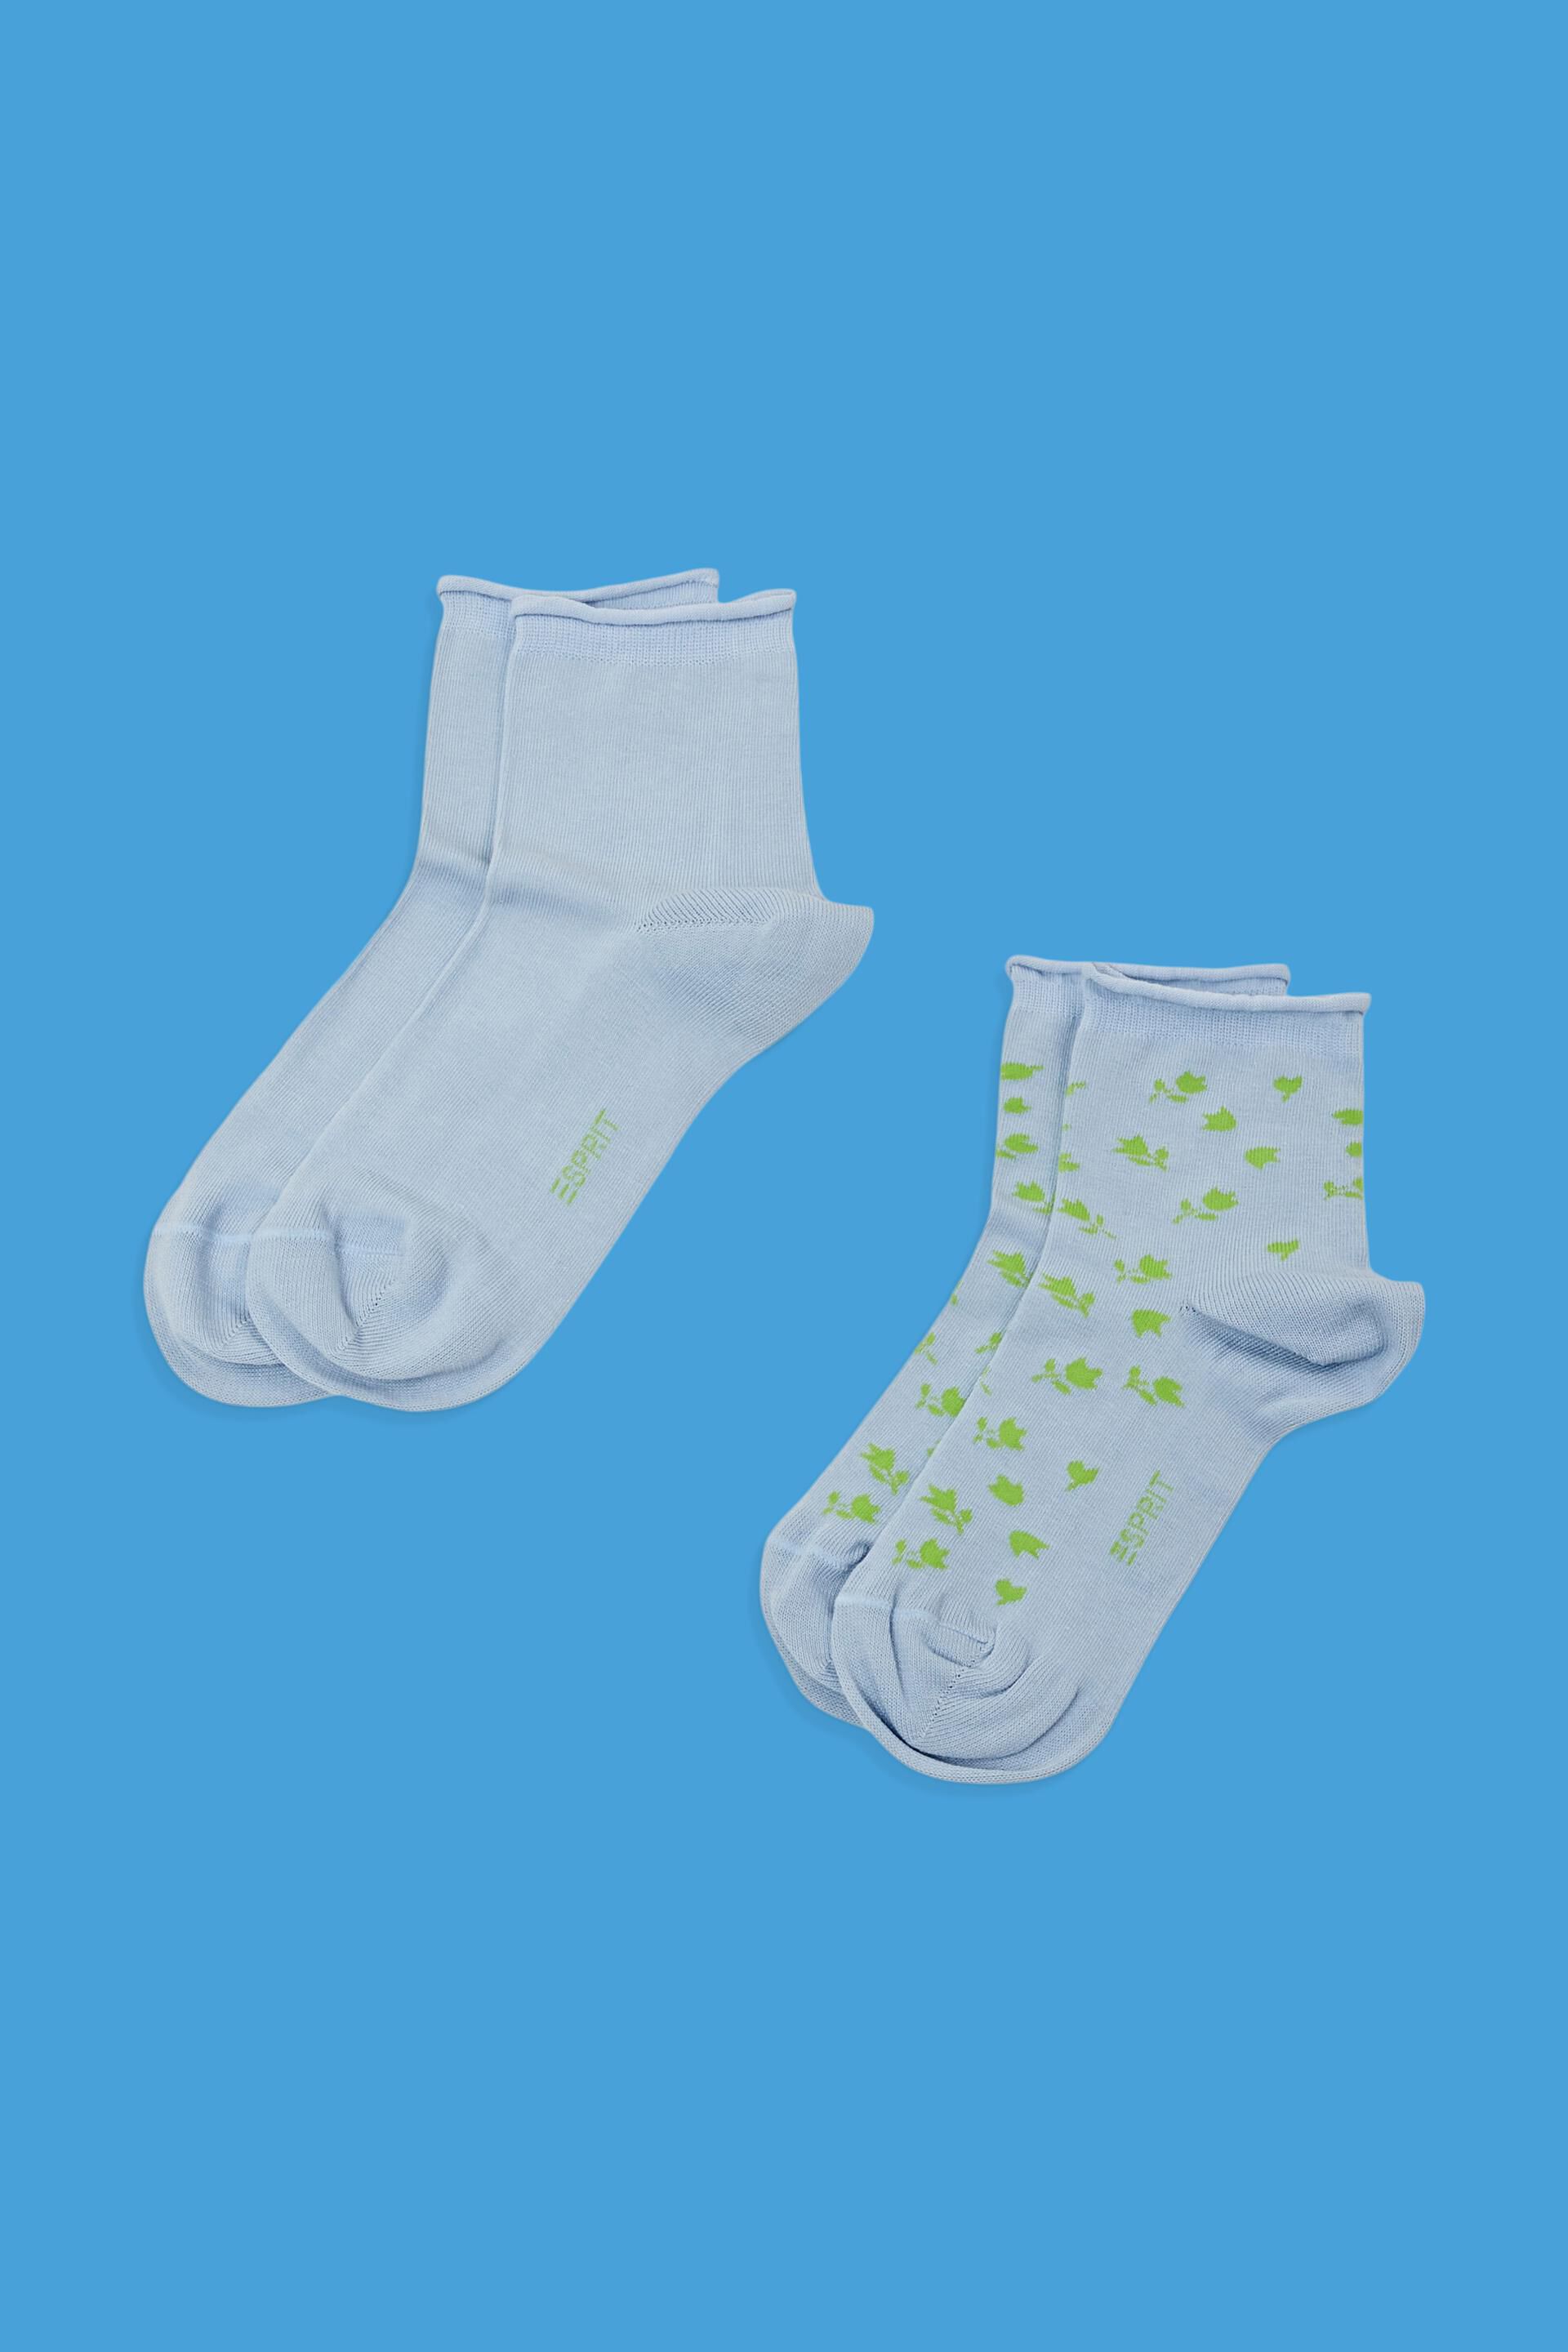 Esprit Online Store 2-pack of short socks with floral pattern